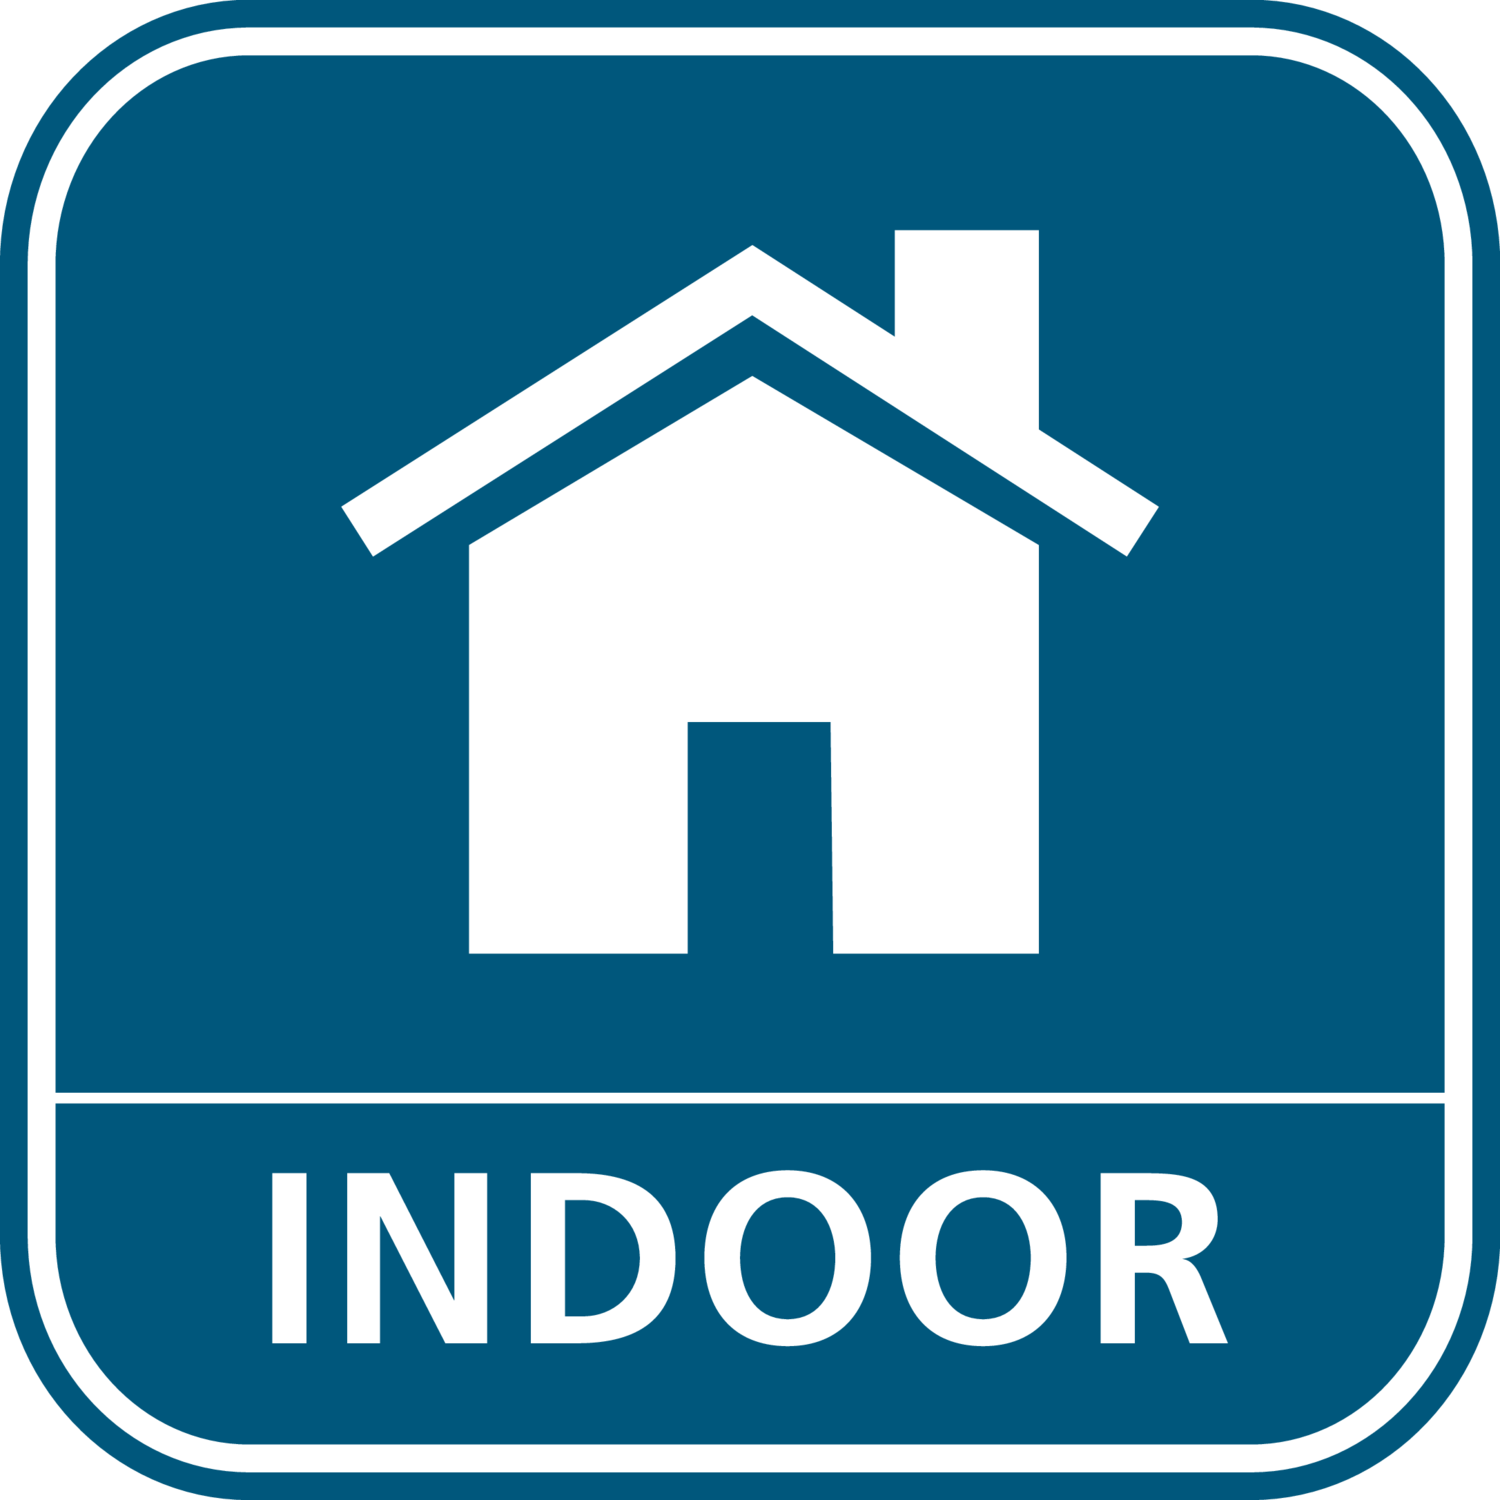 suitable for indoor areas